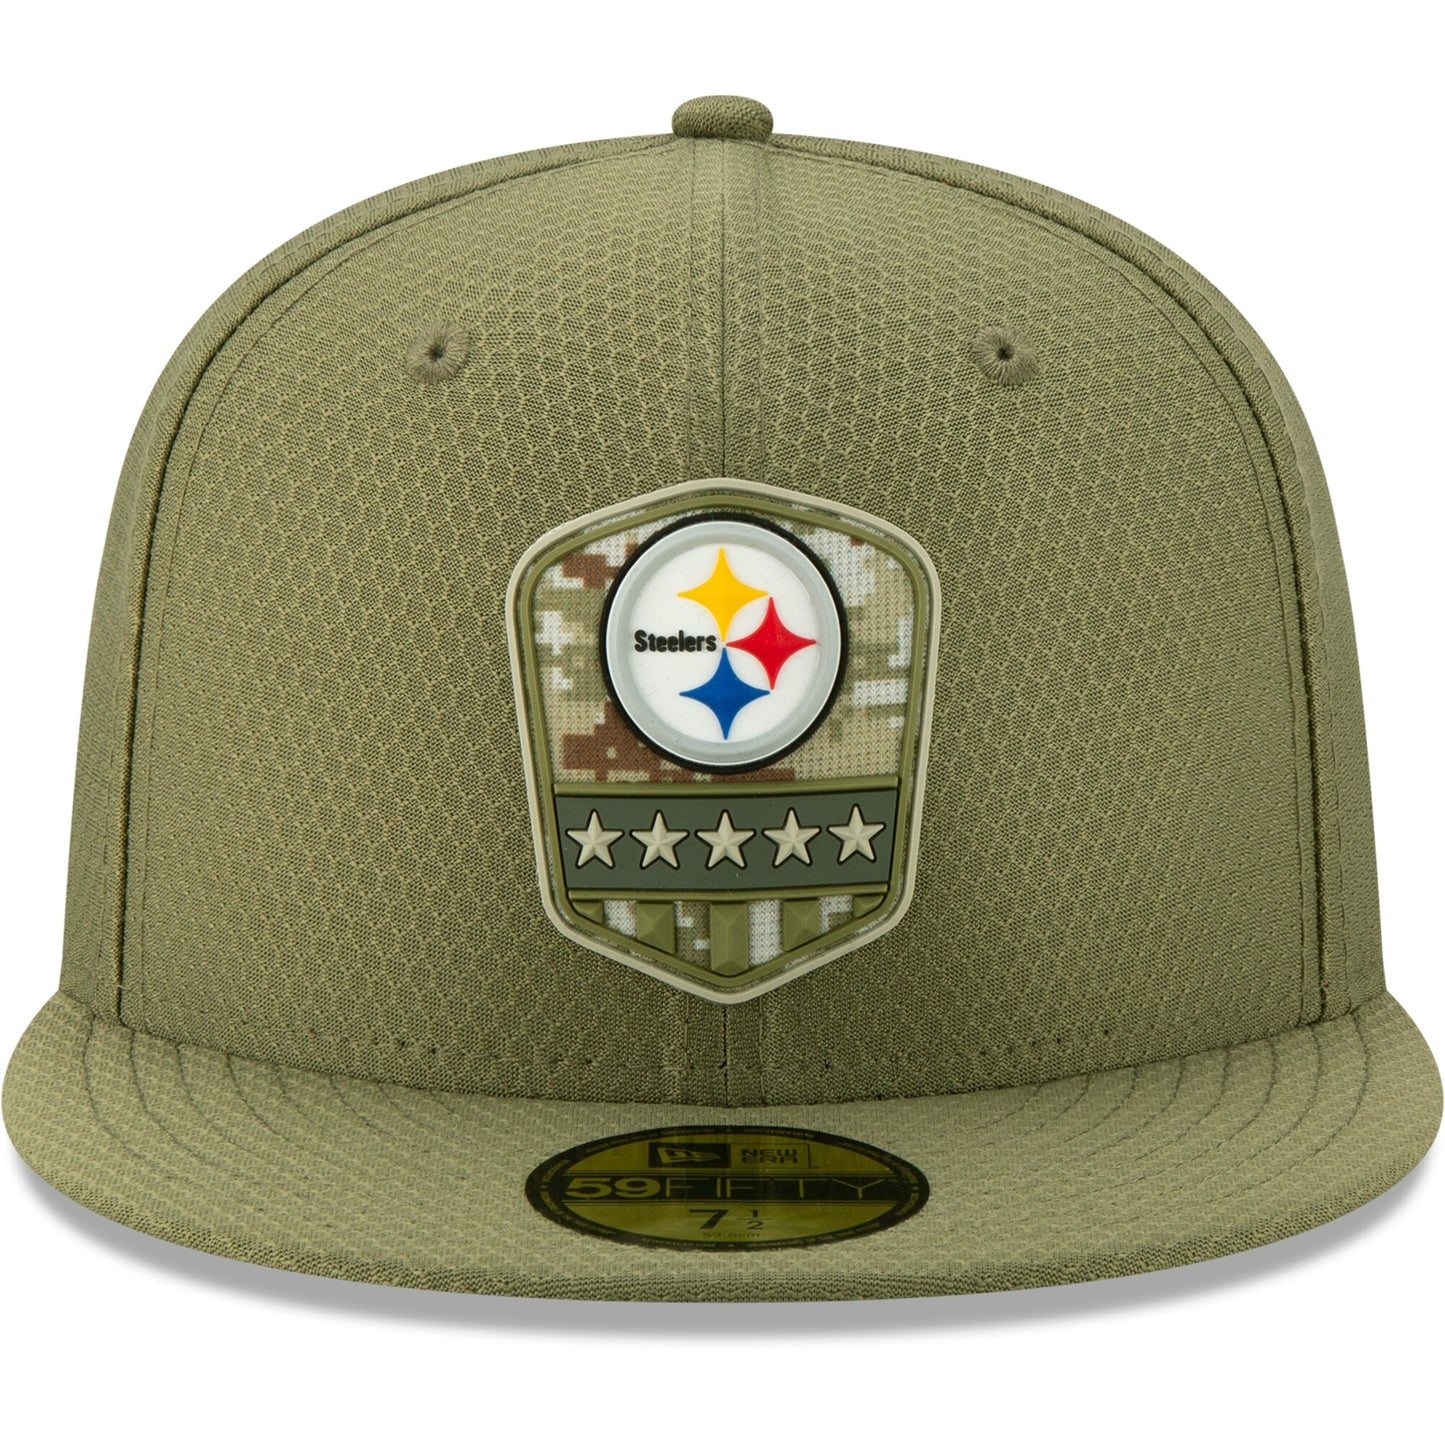 Pitsburgh Steelers New Era Salute To Service 59FIFTY Fitted Hat – Olive